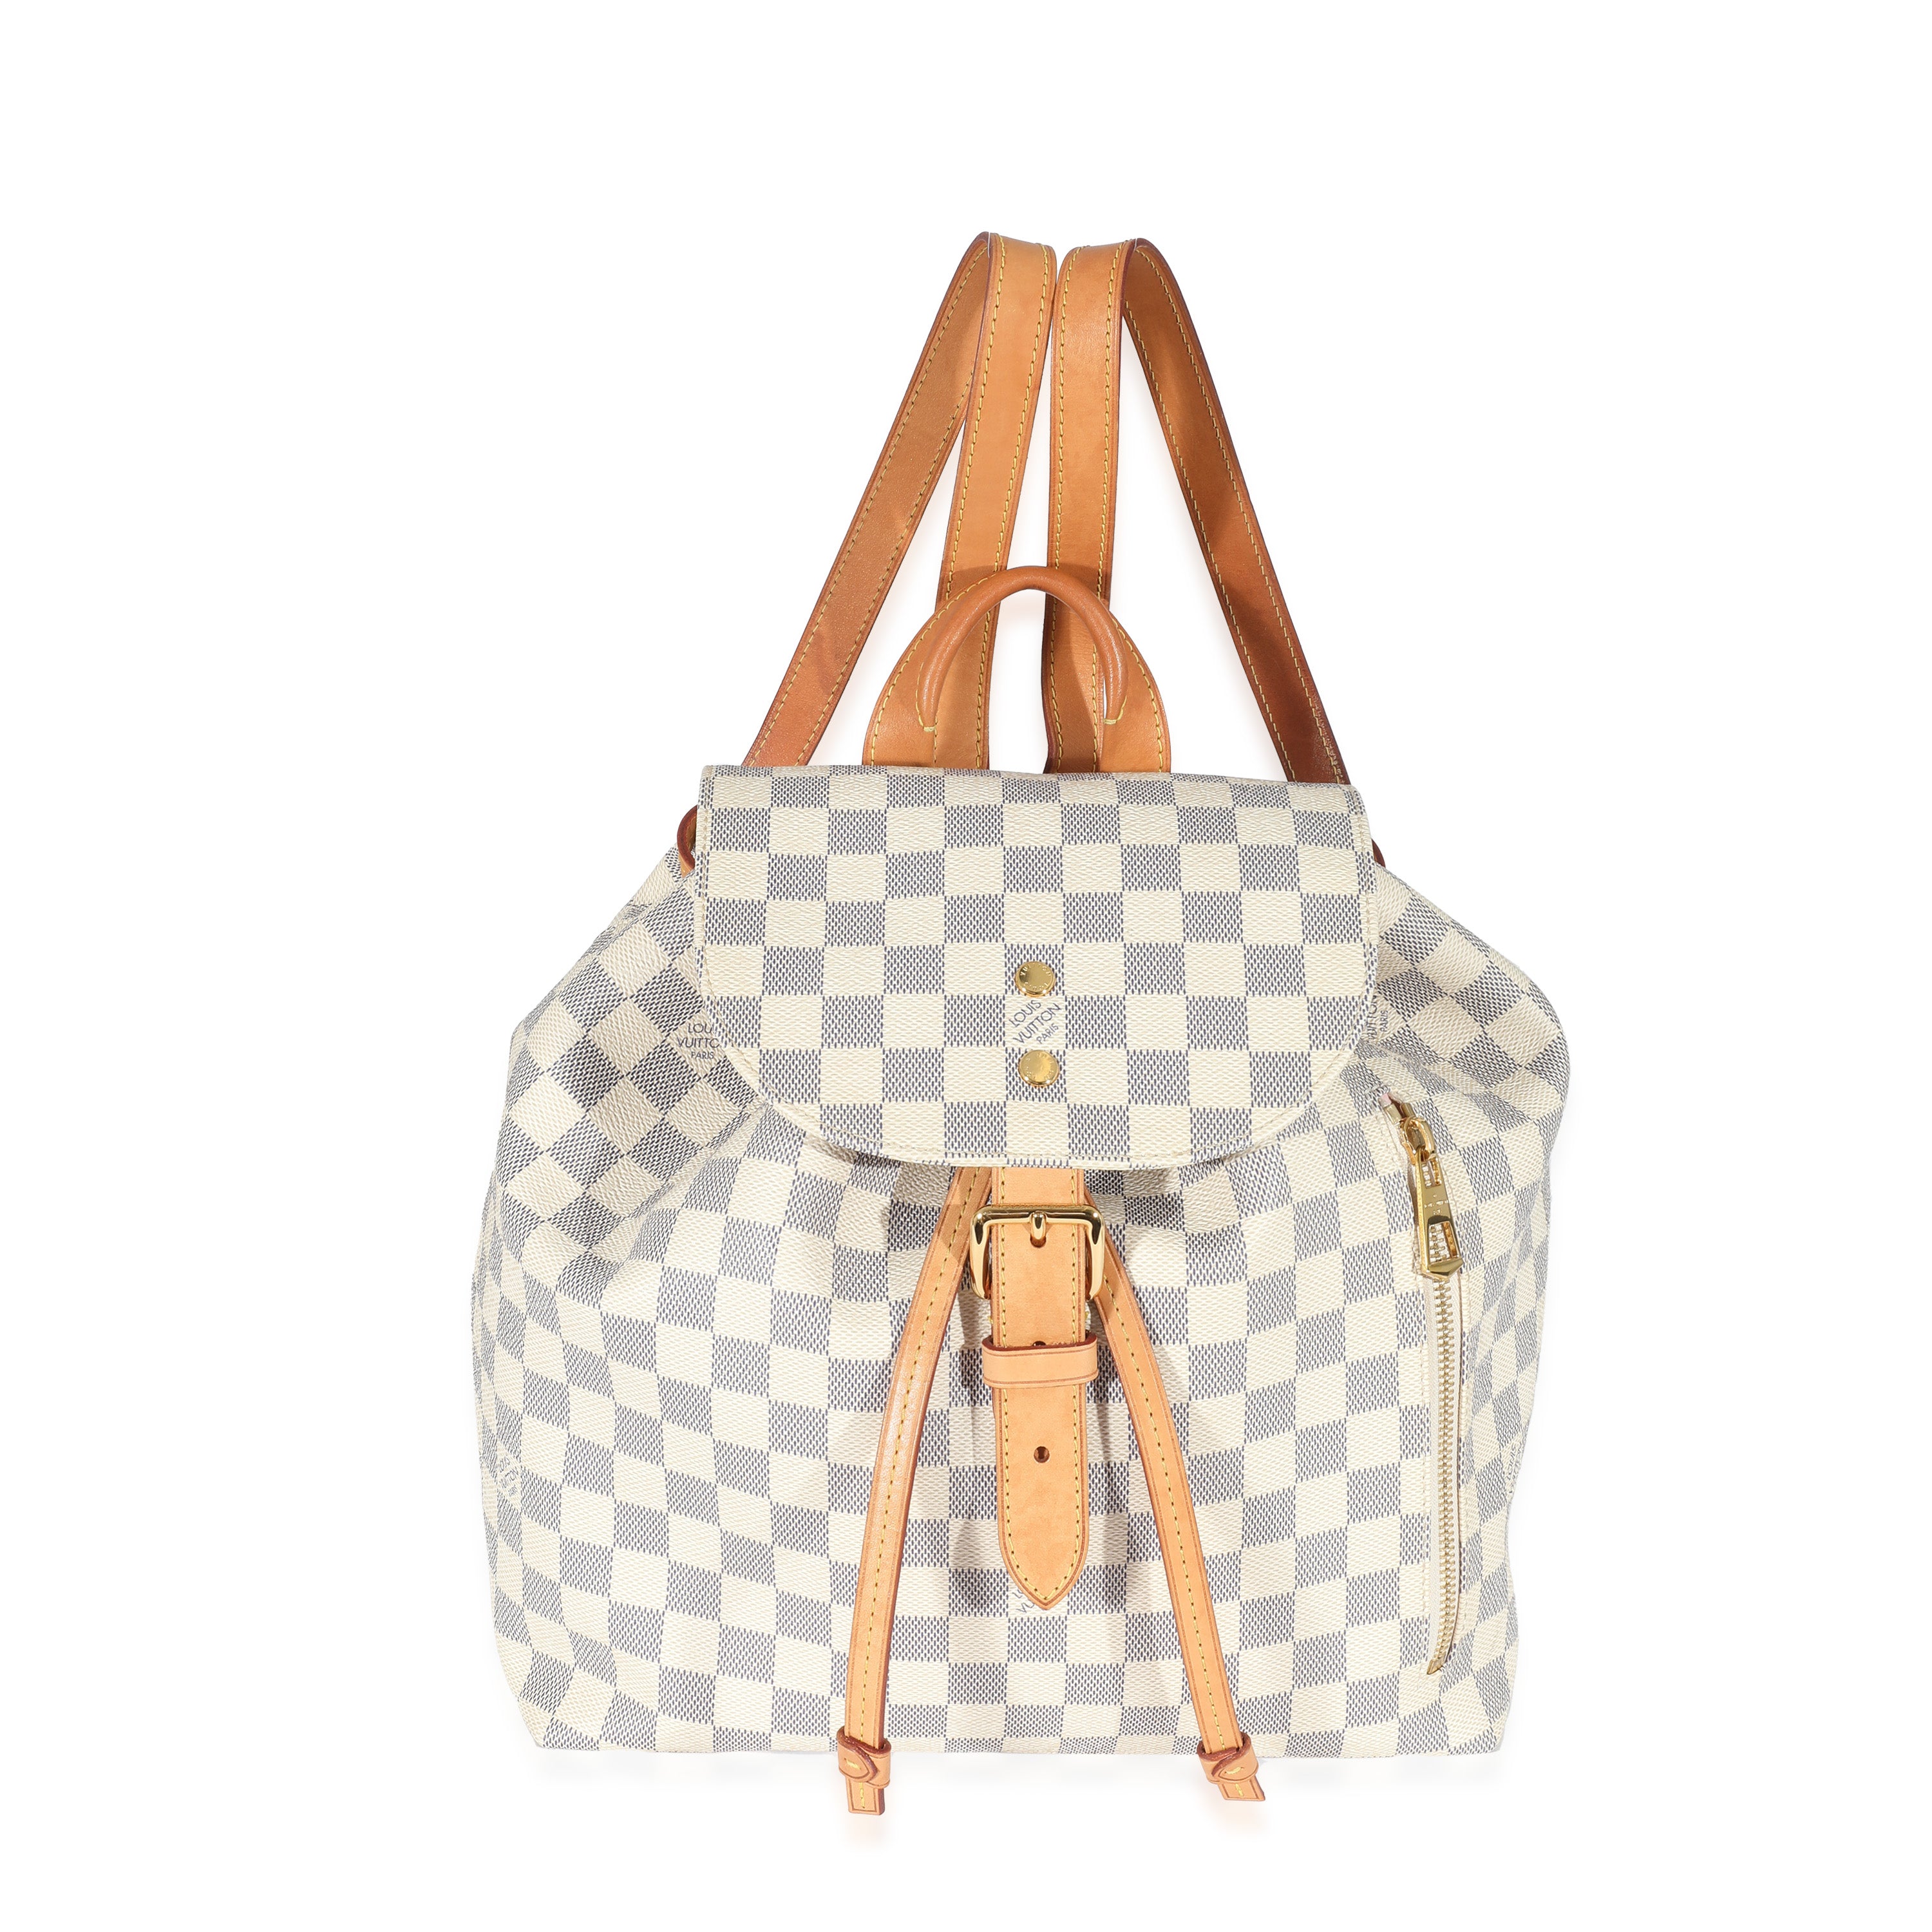 Sperone Backpack Louis Vuitton  Louis vuitton backpack outfit